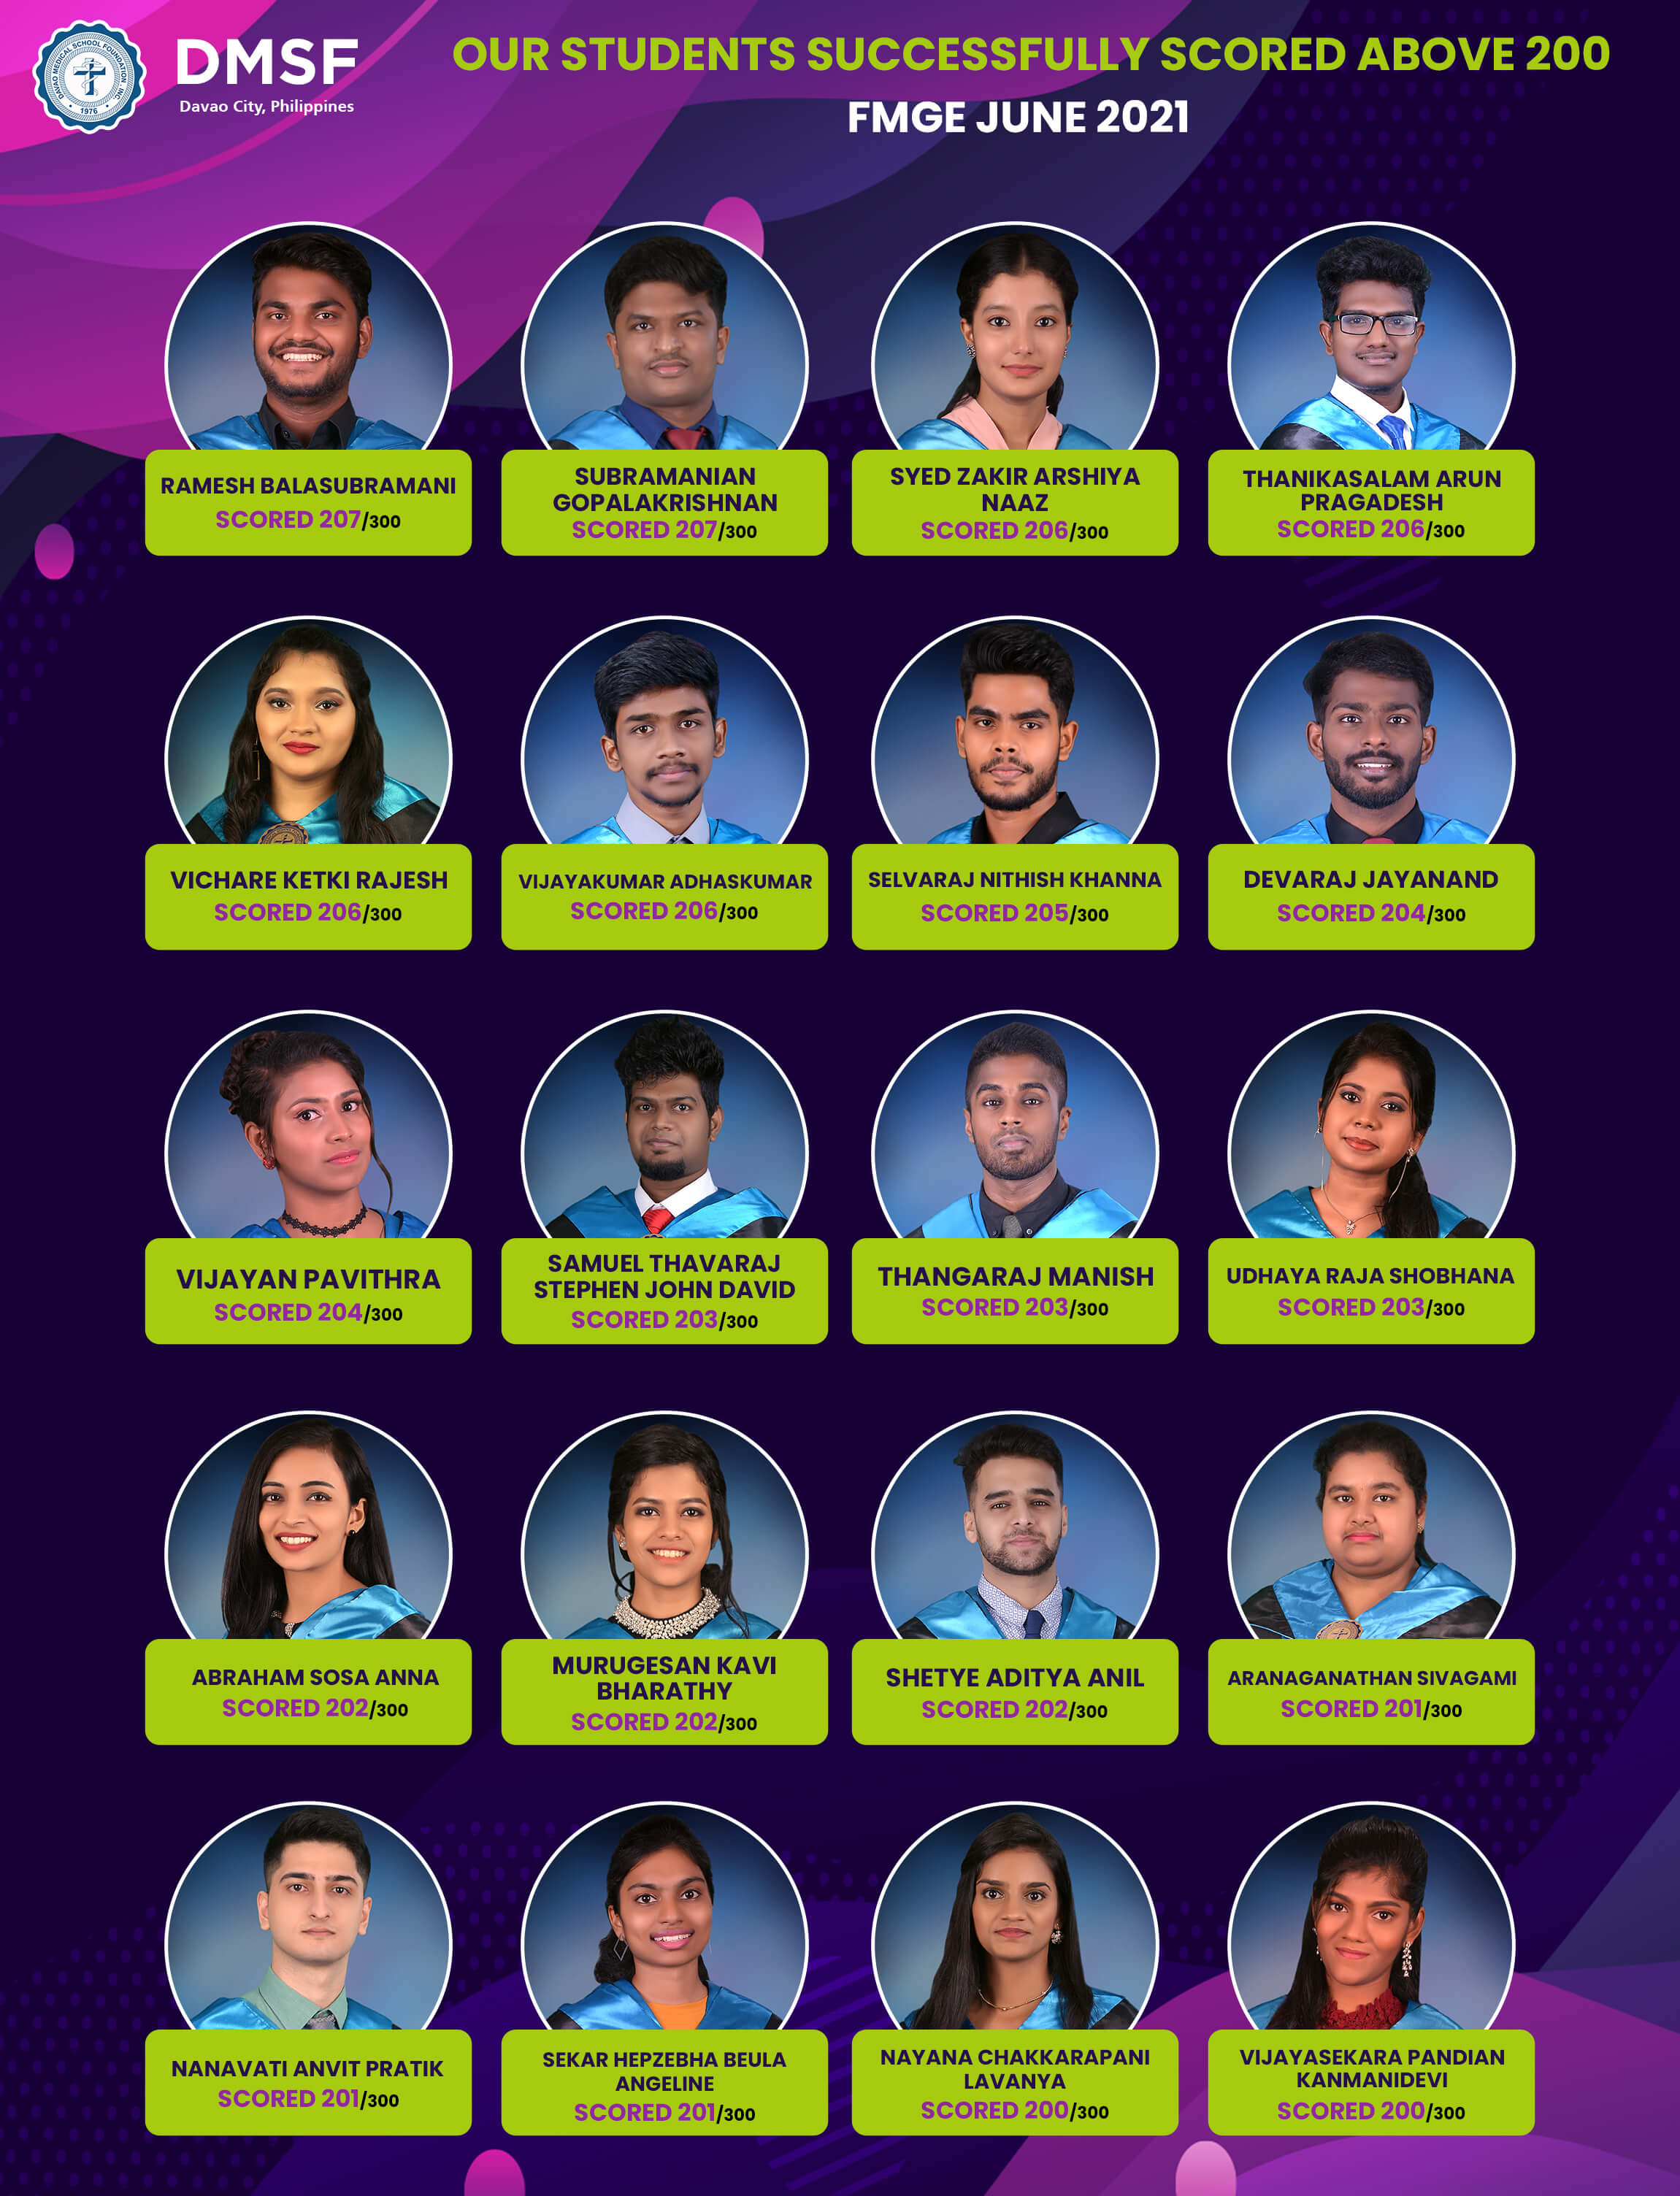 Students of DMSF who scored above 200 at FMGE June 2021